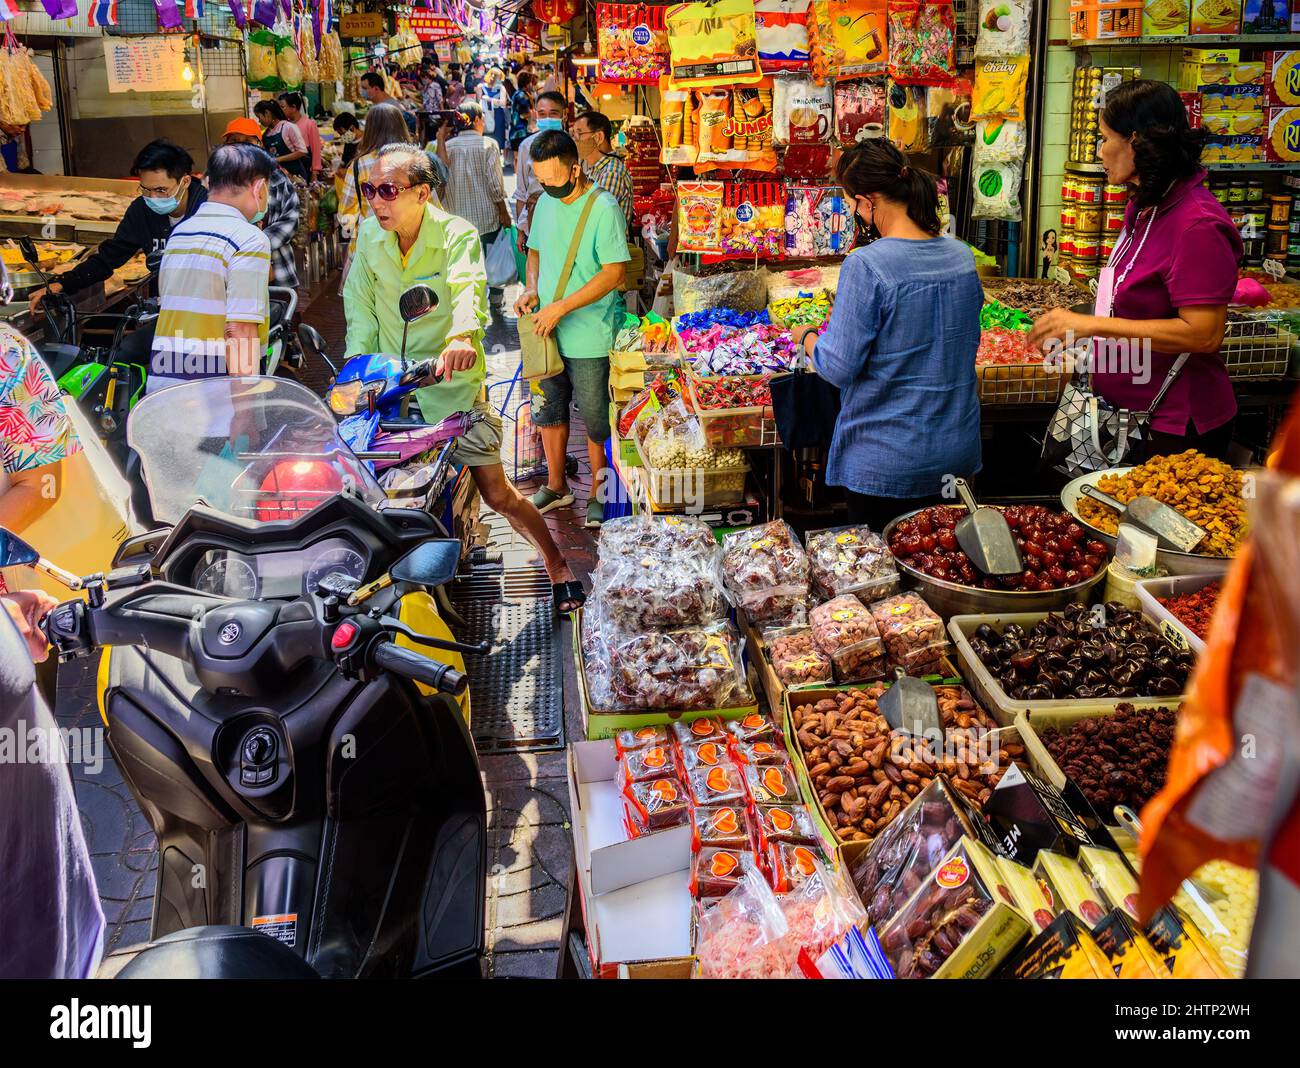 Chinatown - Yawarad, Bangkok – Nov. 14, 2020: The Chinese market place where we can buy varieties of dehydrated delicacies, condiments, and pickles. Stock Photo